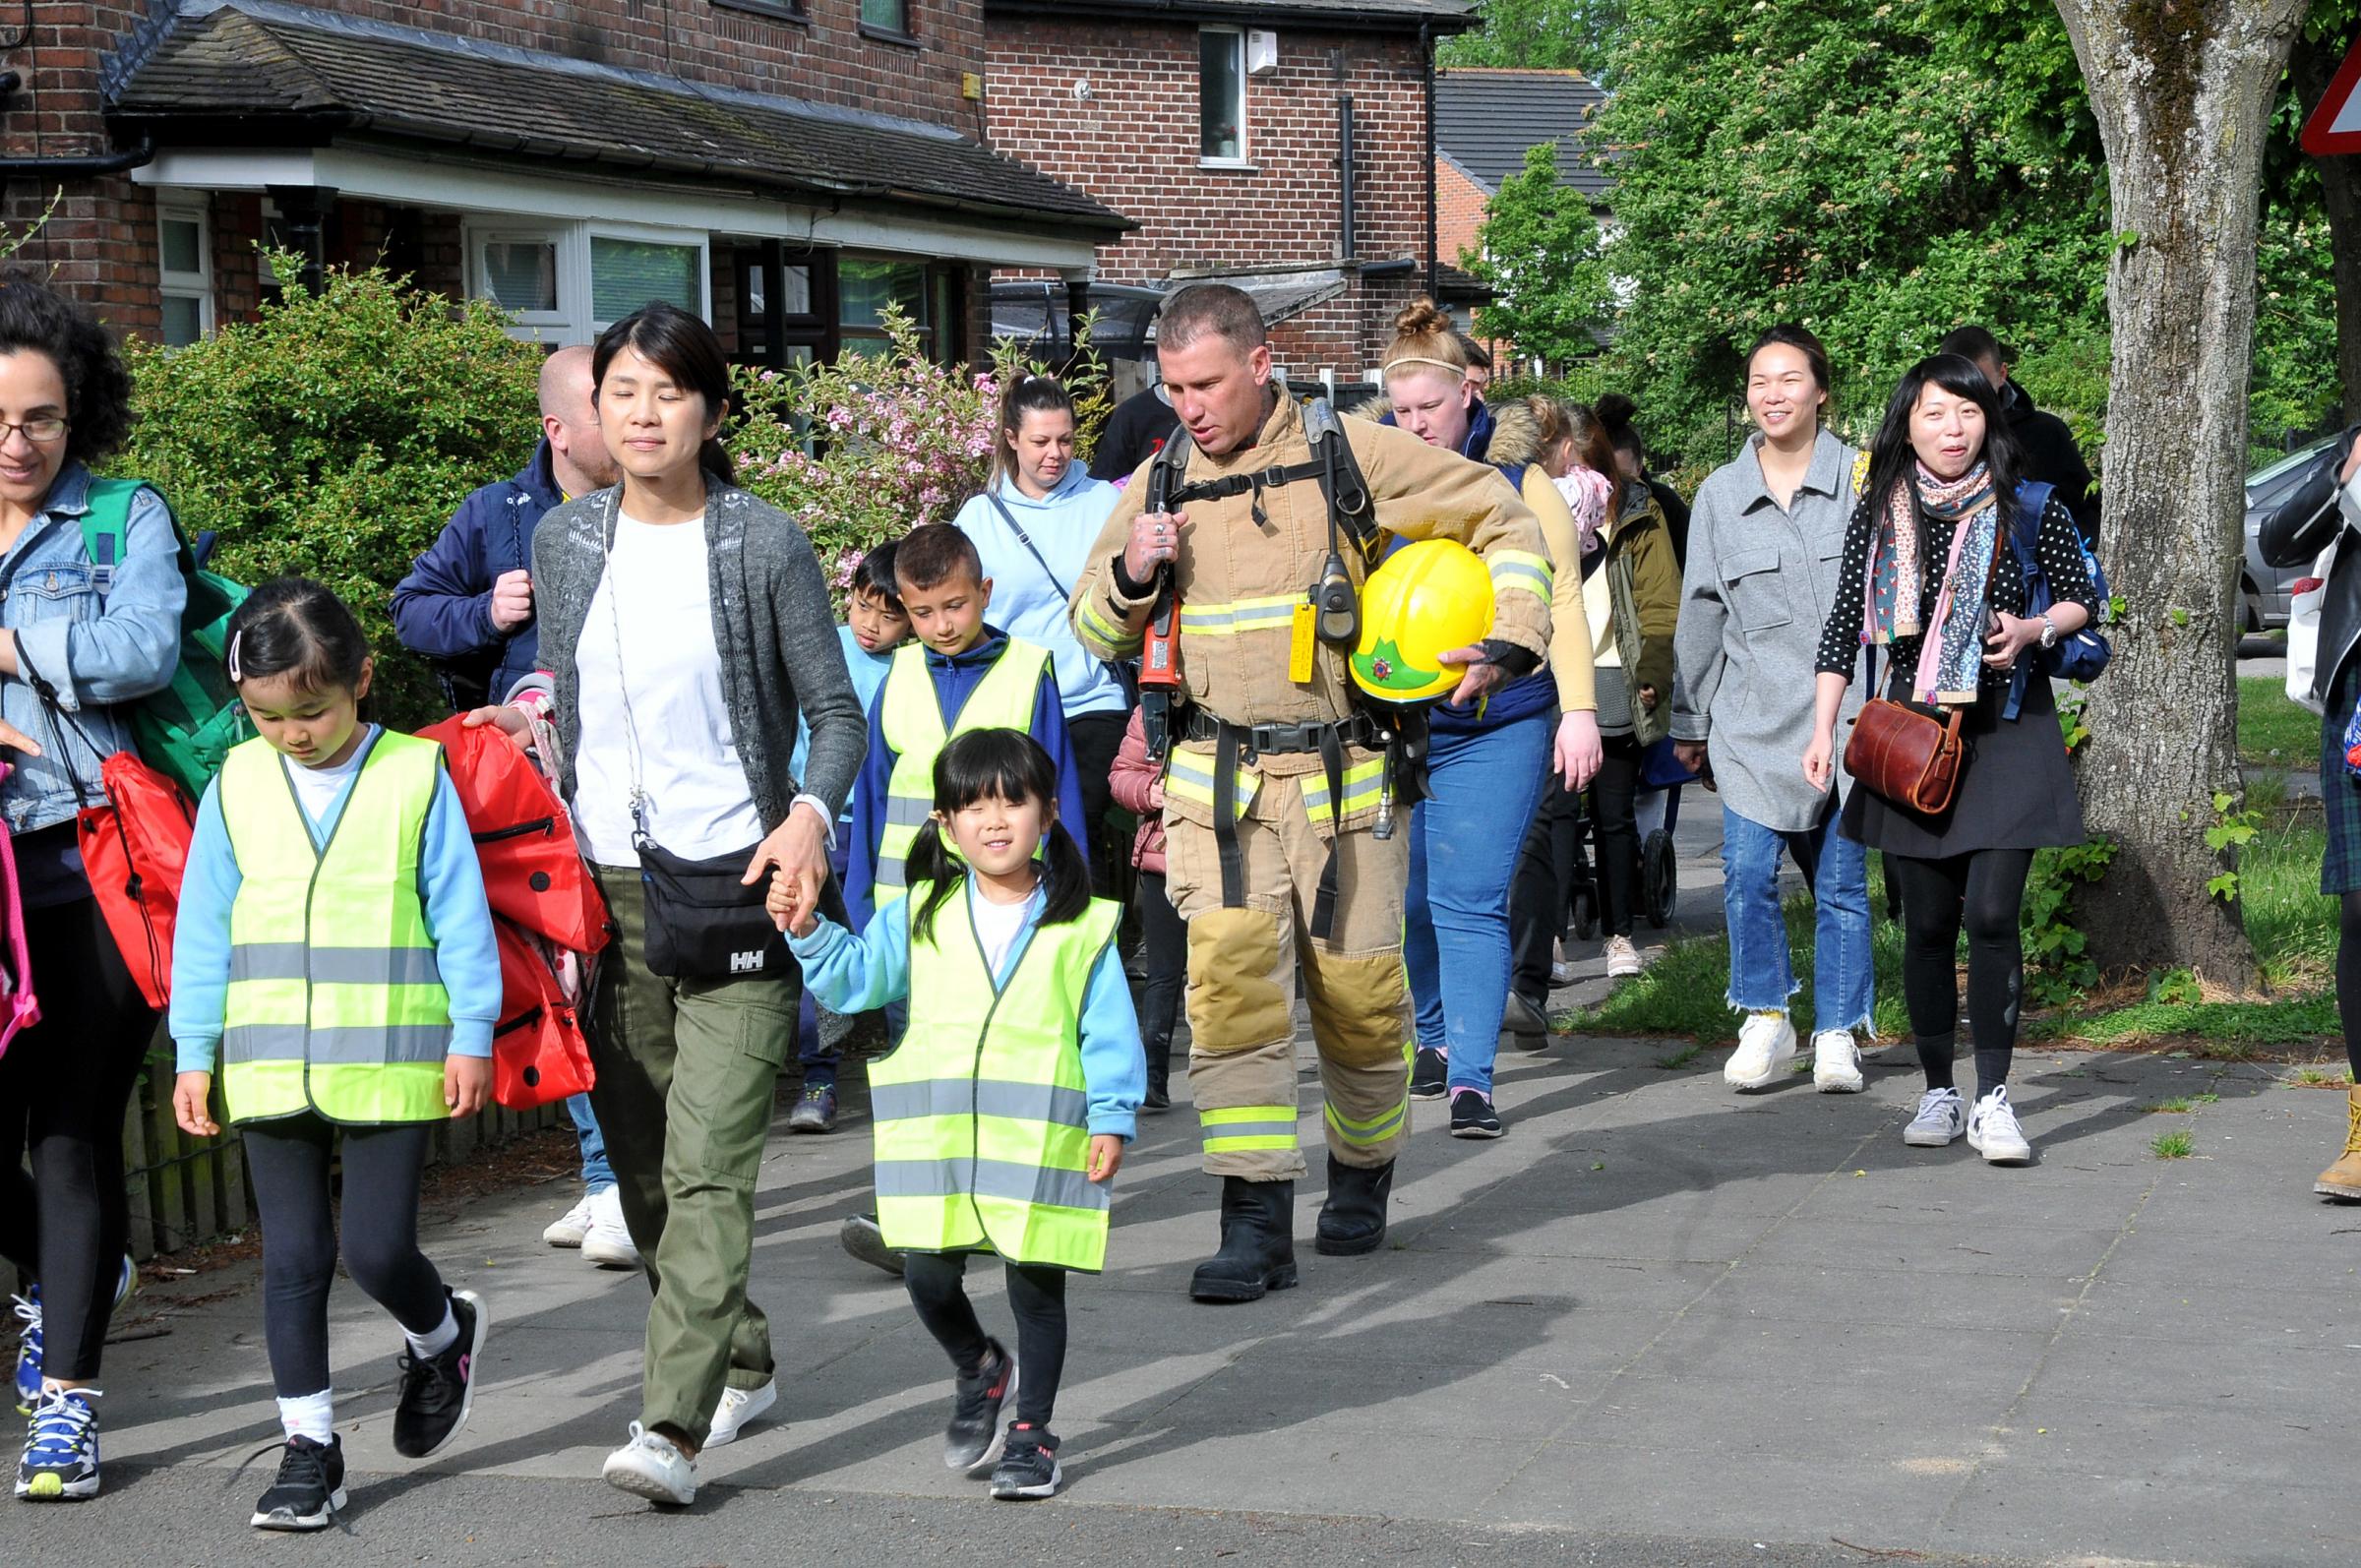 Members from the army attended along with firefighters and police officers